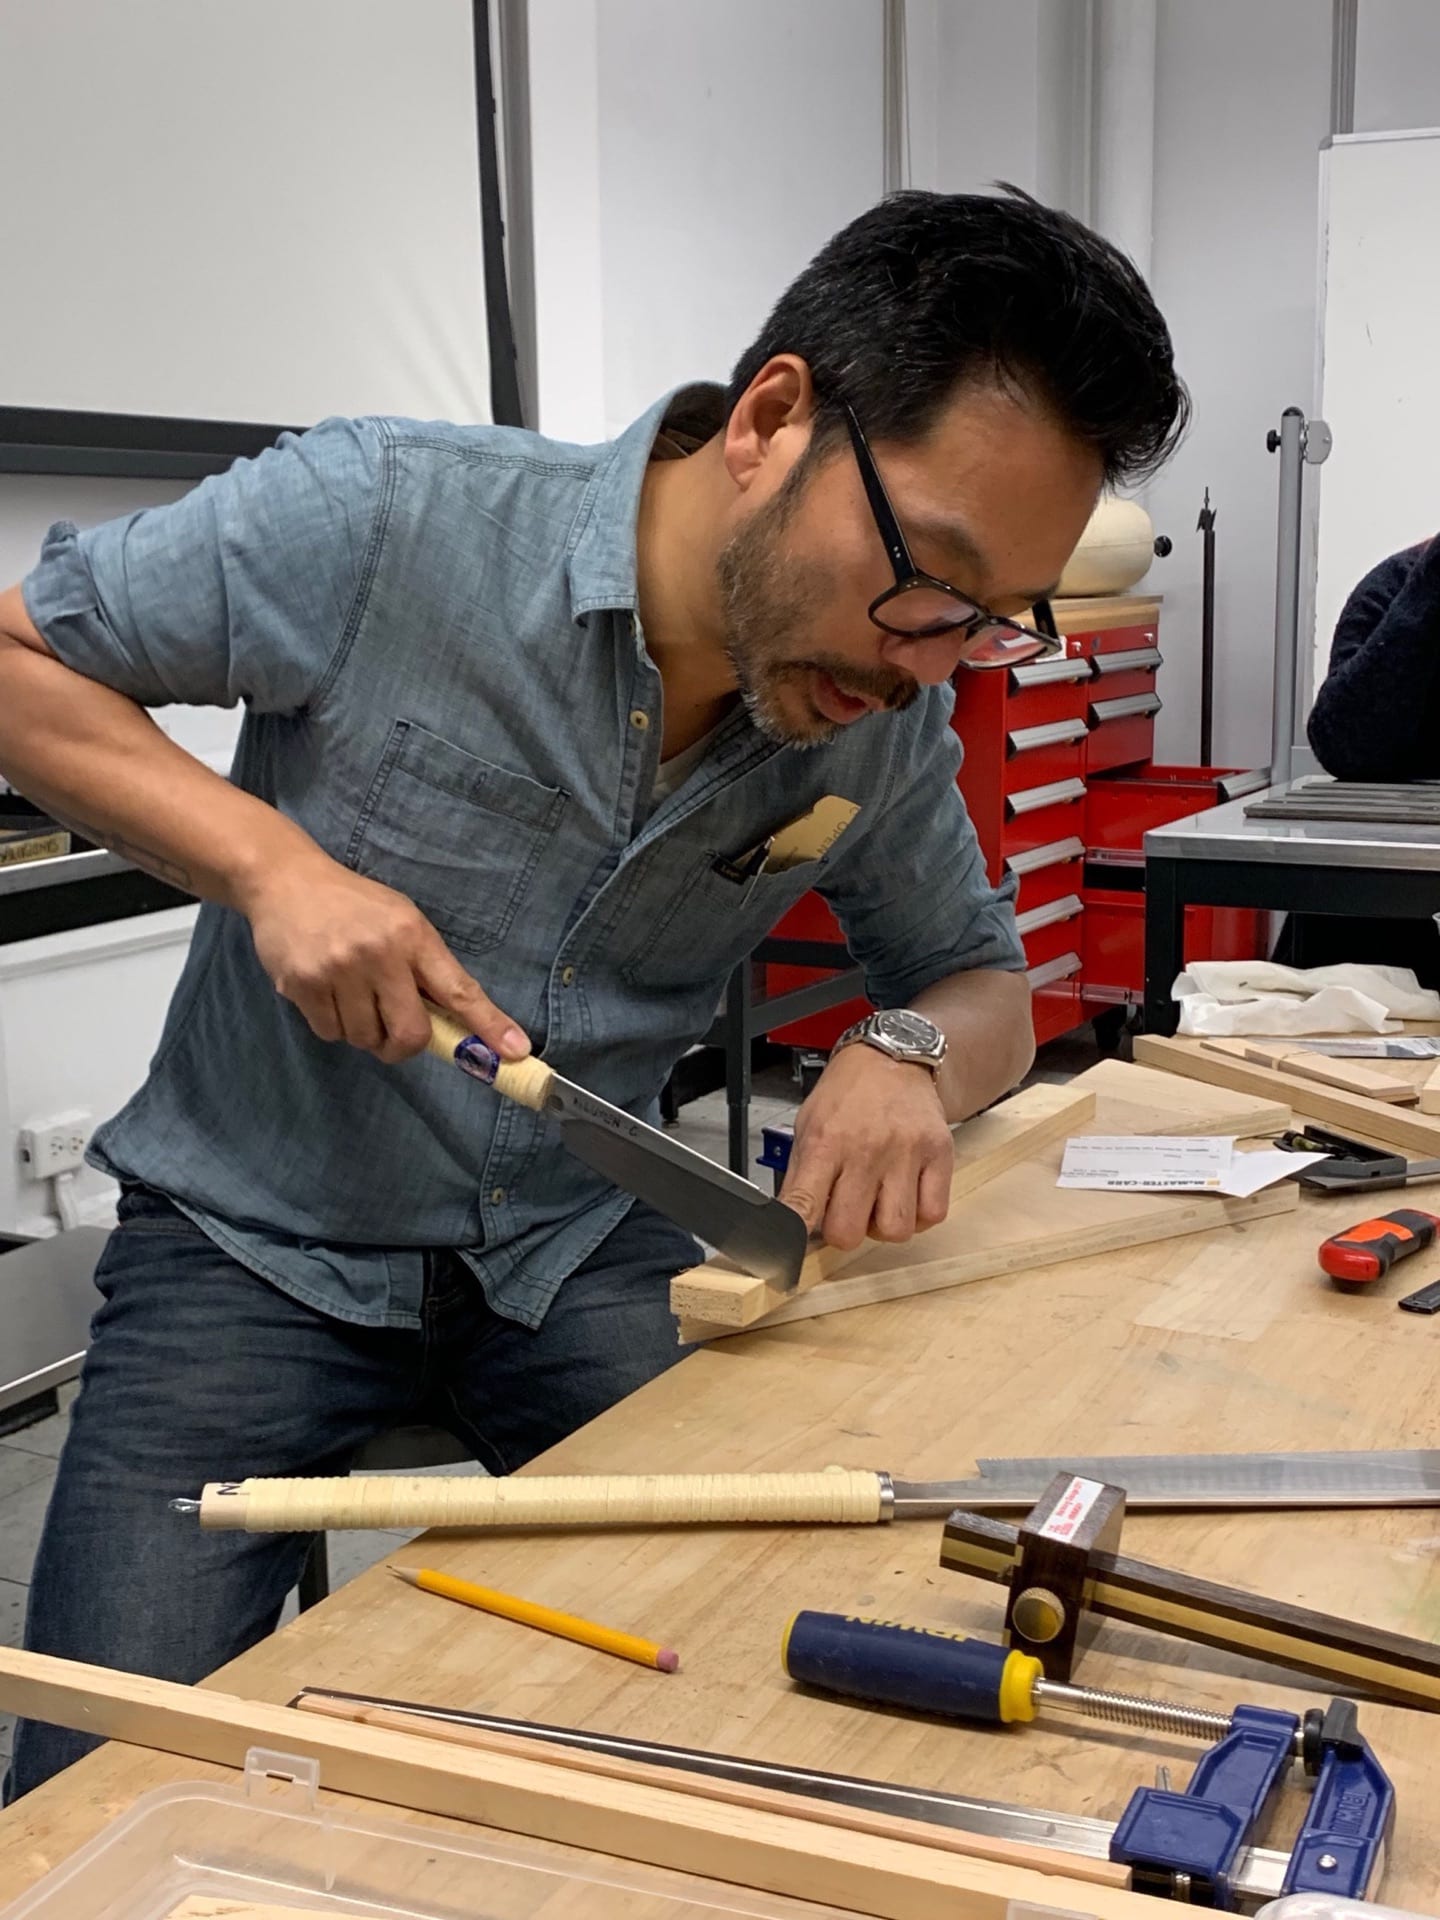 First year workshop by Christian Nguyen on “Basic Carpentry Skills”